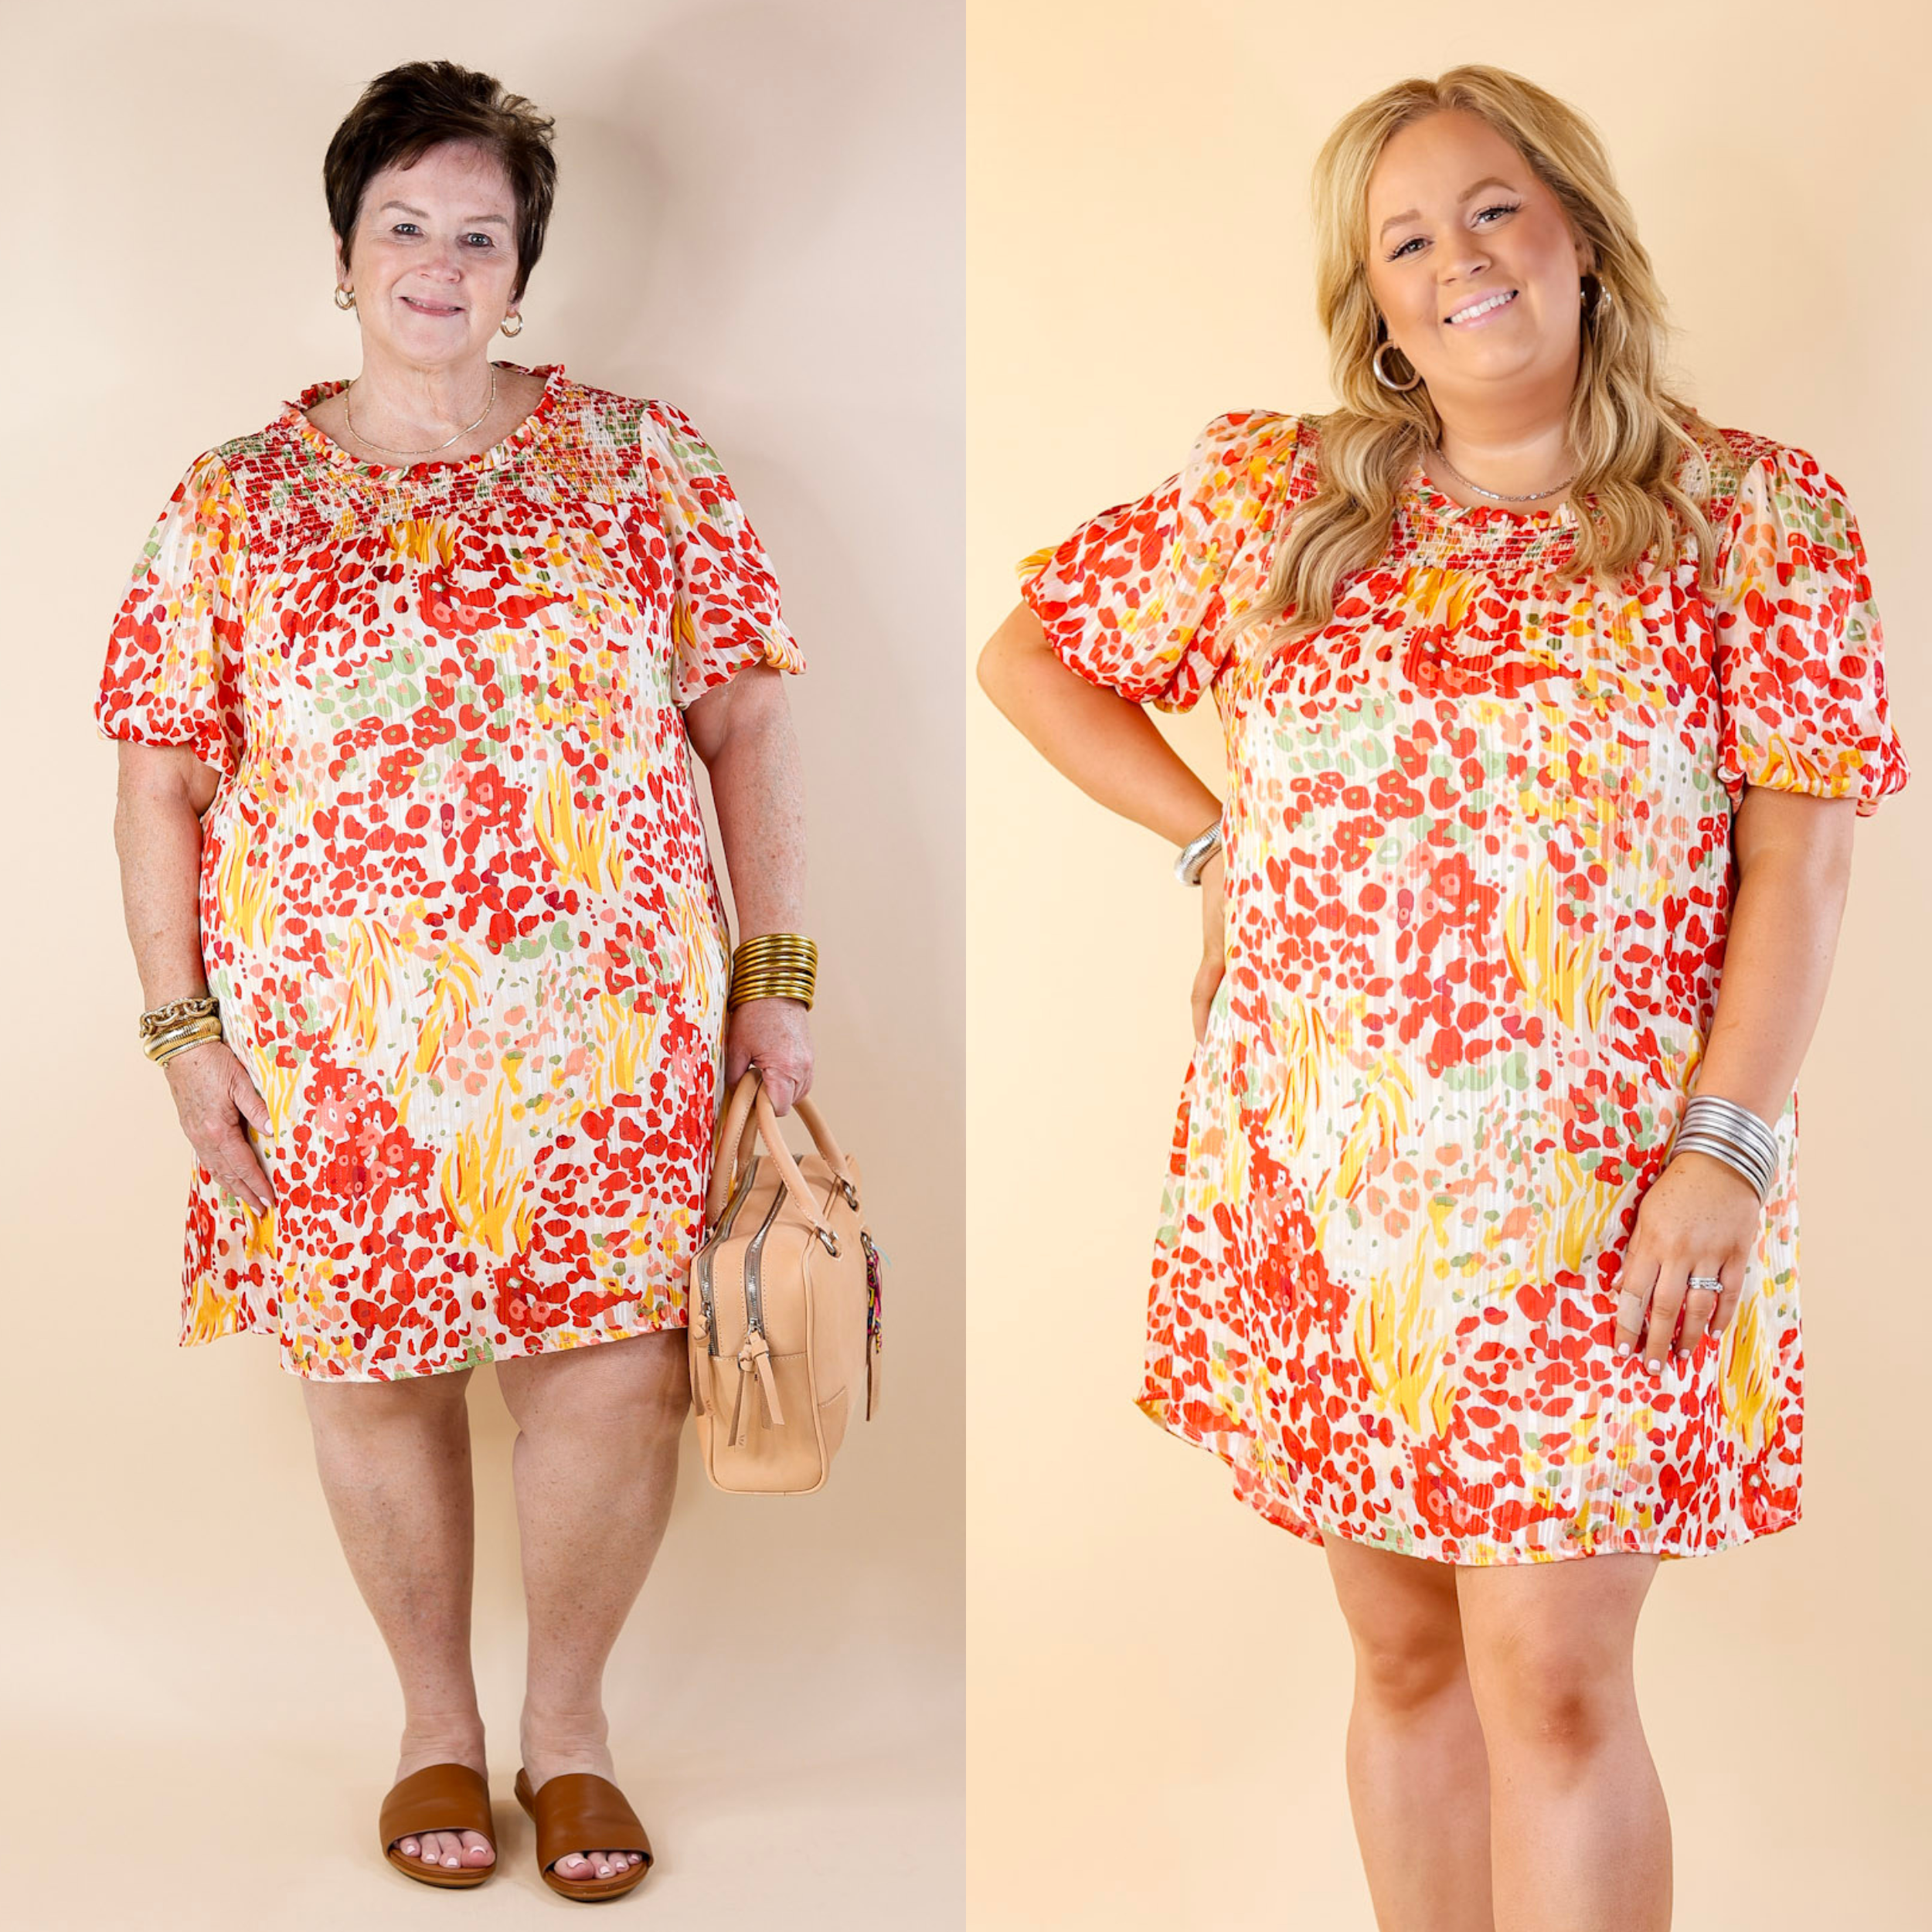 Simply Radiant Mix Floral Print Dress with Short Sleeves in Red and Yellow Mix - Giddy Up Glamour Boutique